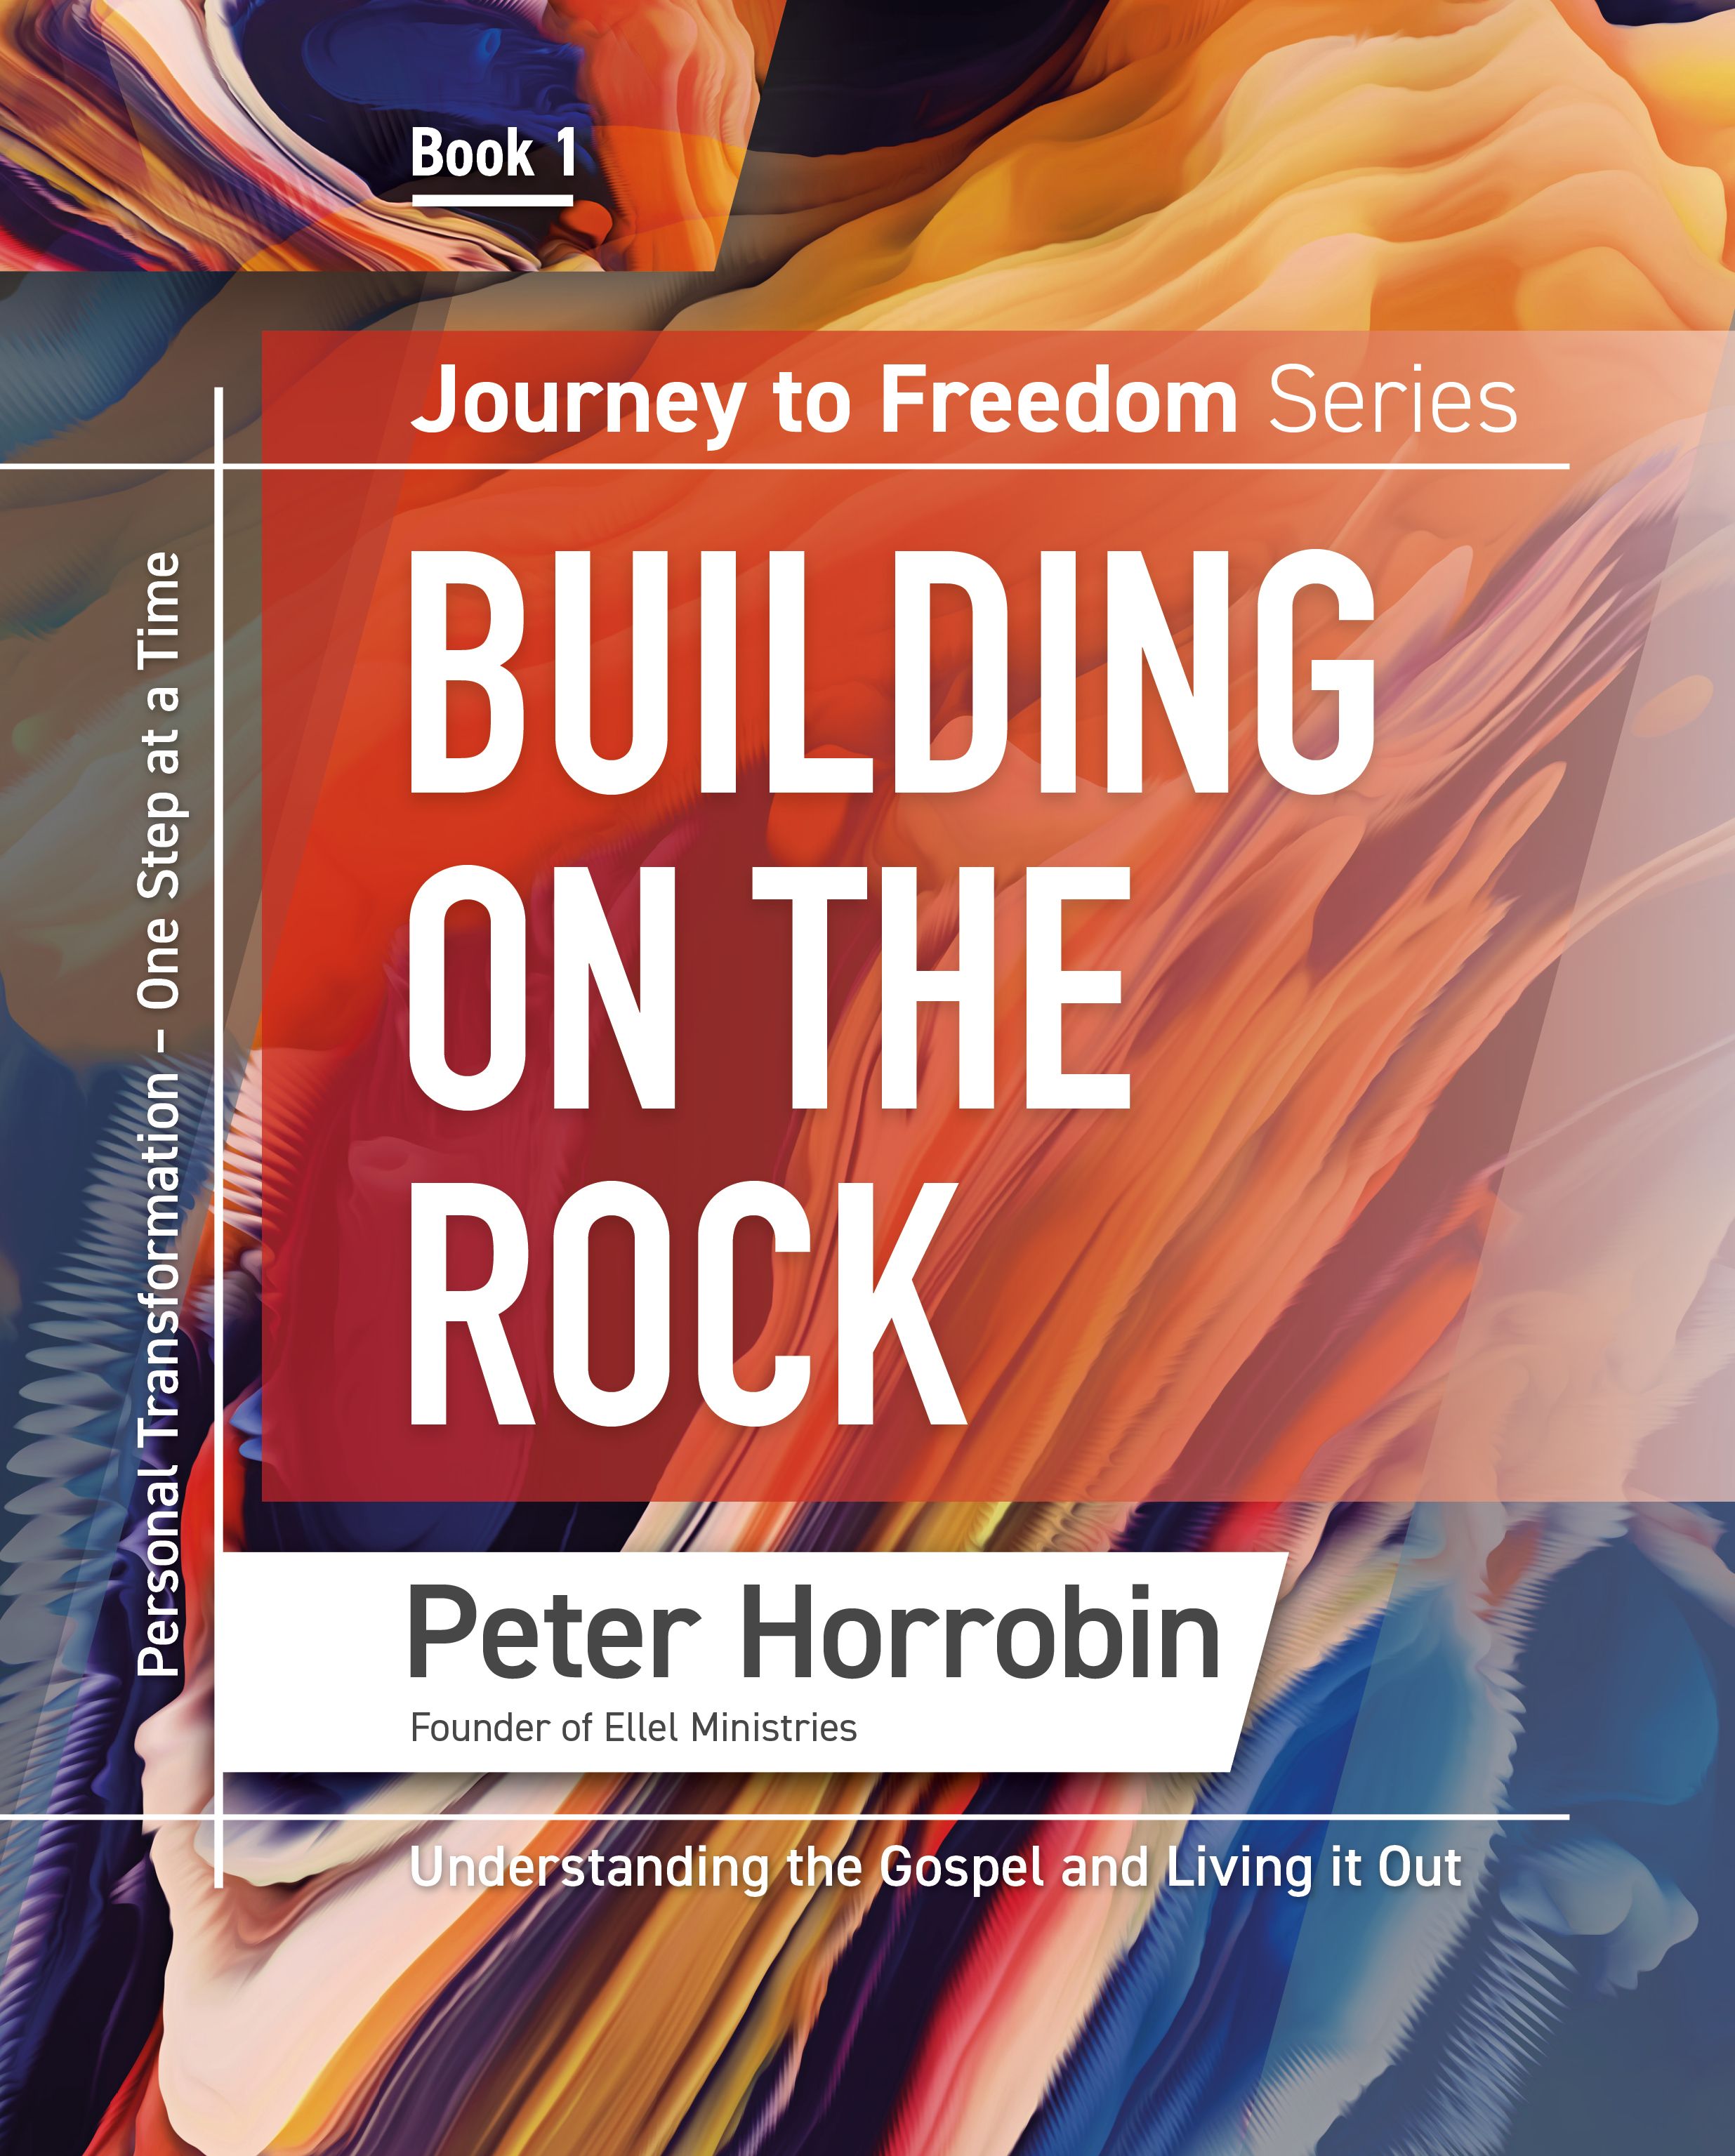 Journey to Freedom Book 1 - Building on the Rock